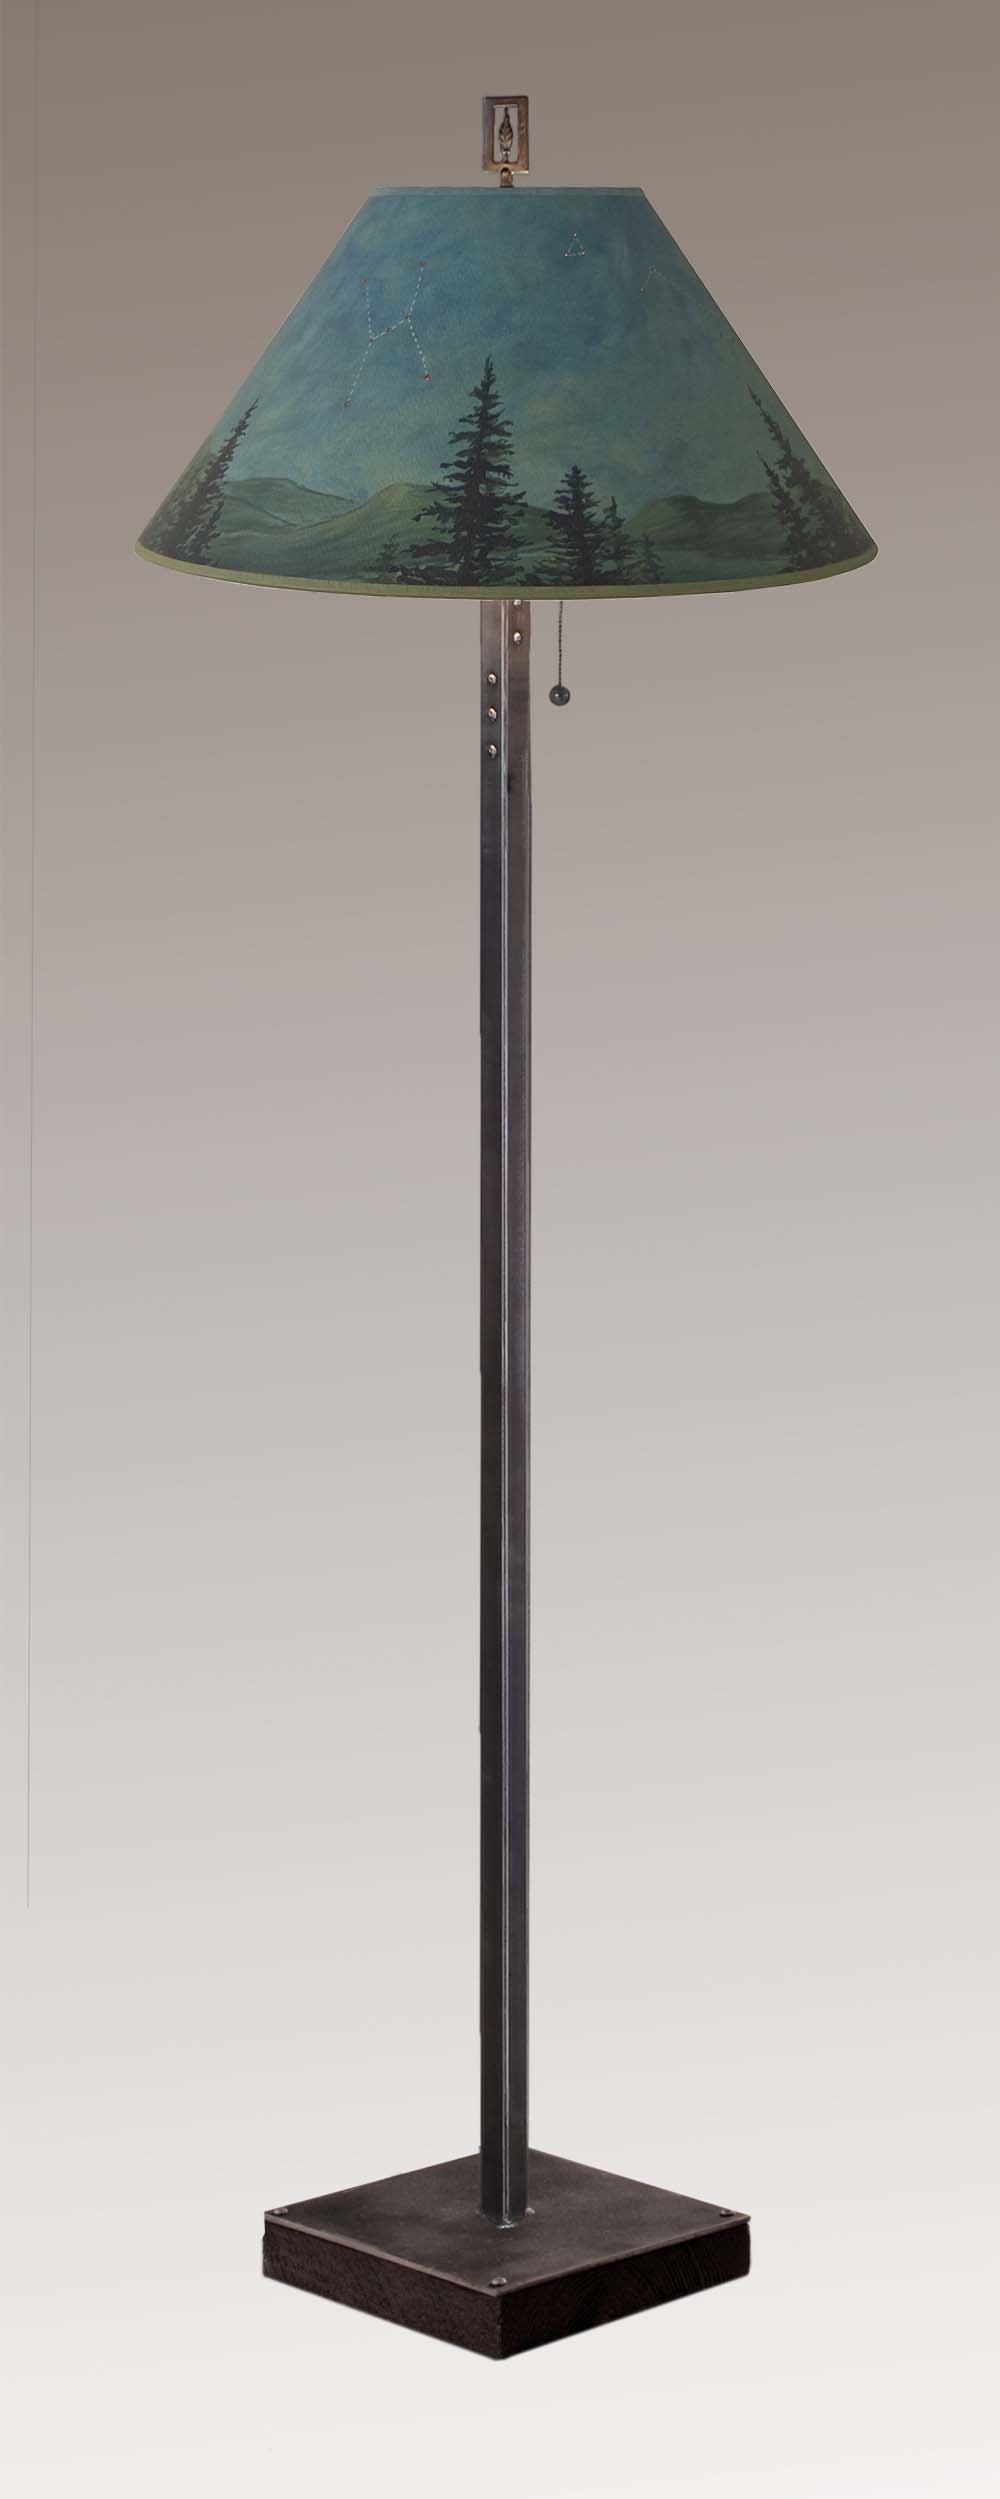 Steel Floor Lamp on  Reclaimed Wood with Large Conical Shade in Midnight Sky